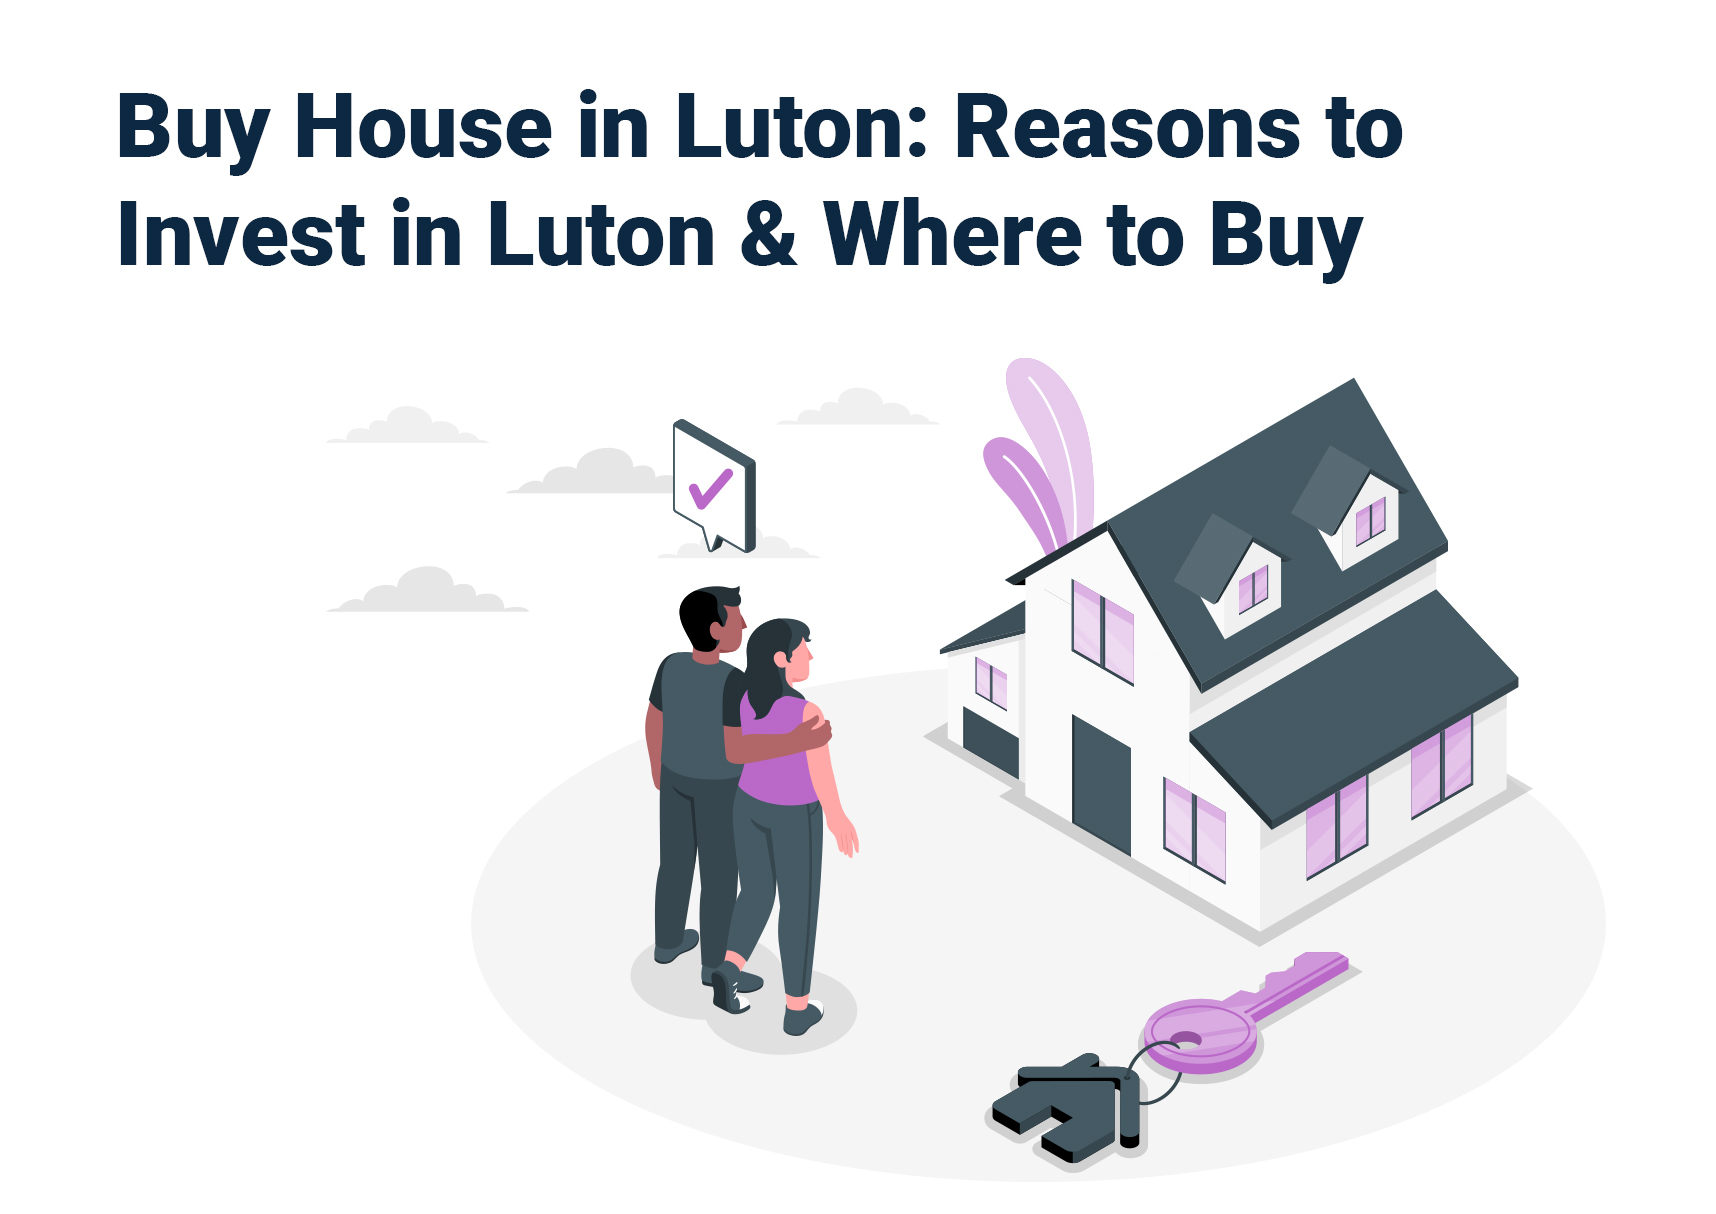 Buy House in Luton: Reasons to Invest in Luton & Where to Buy